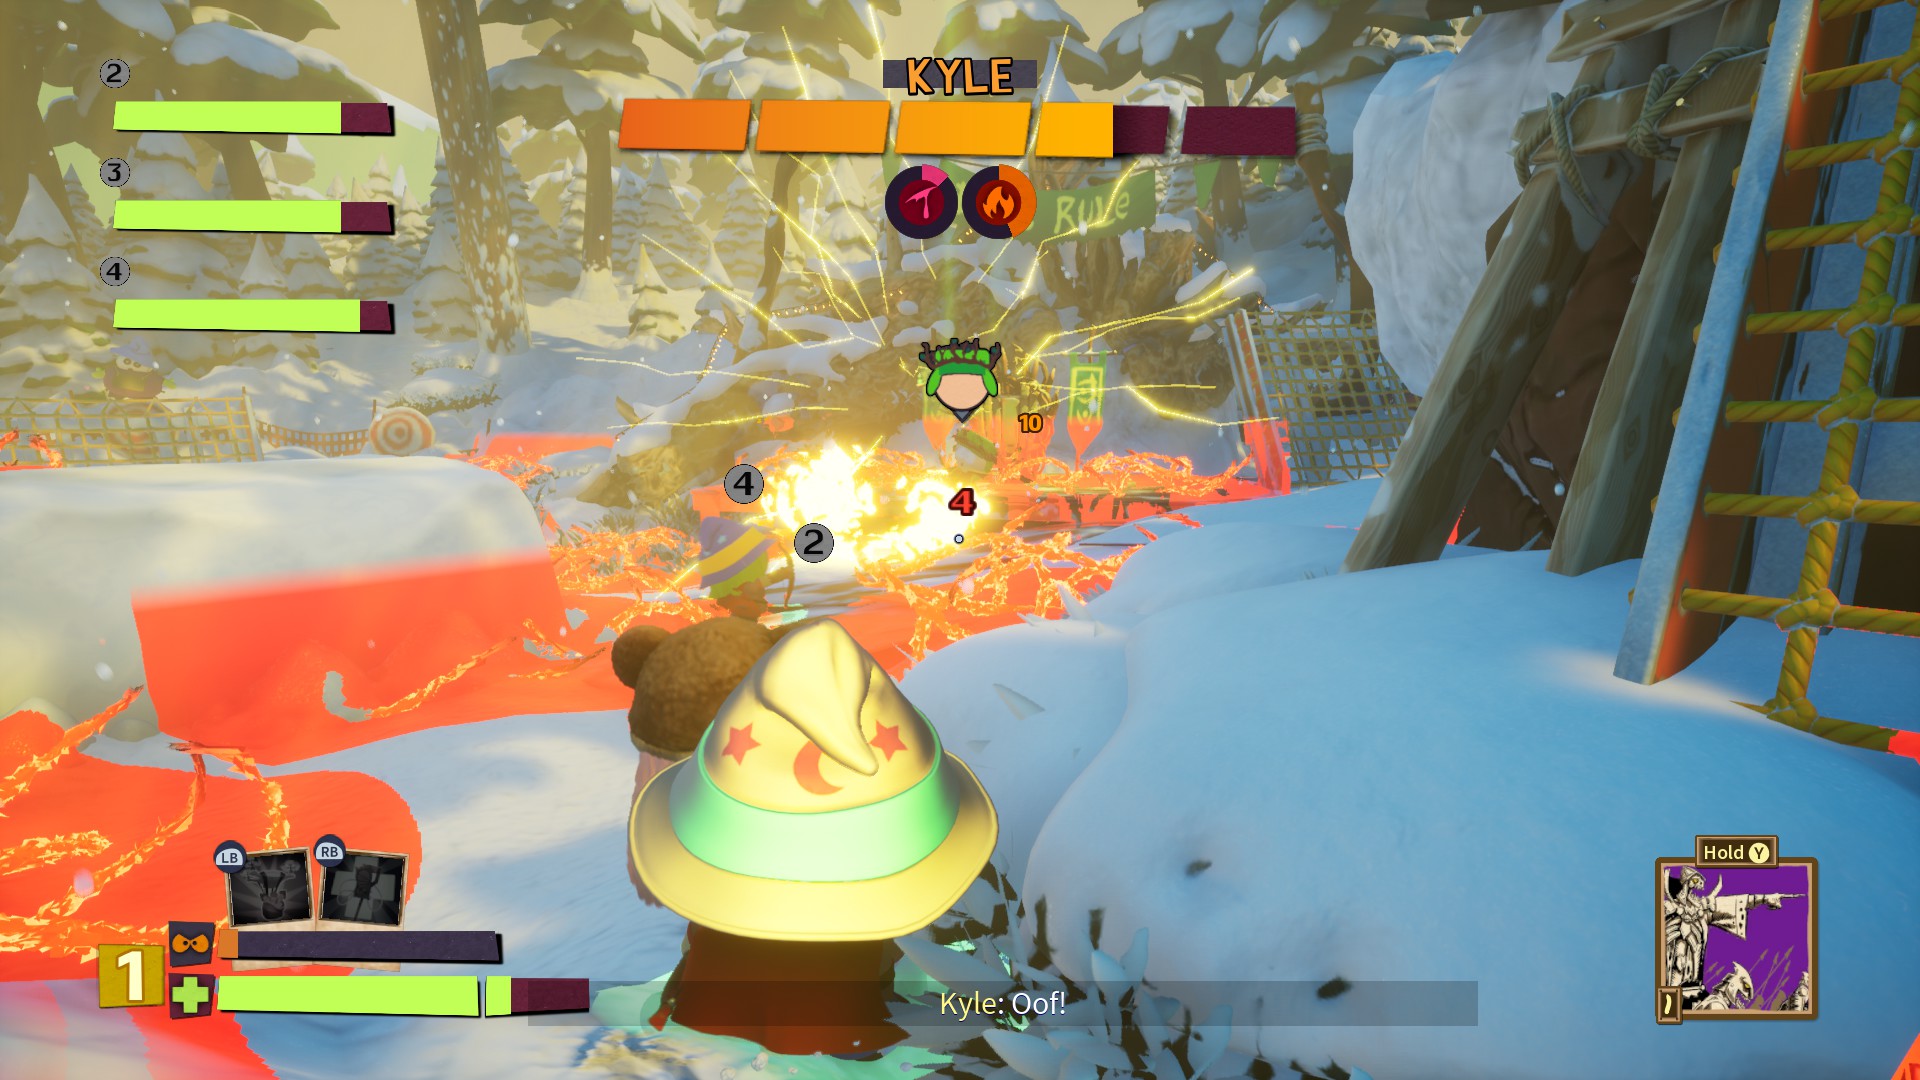 An in game image of the Kyle boss fight from South Park: Snow Day!